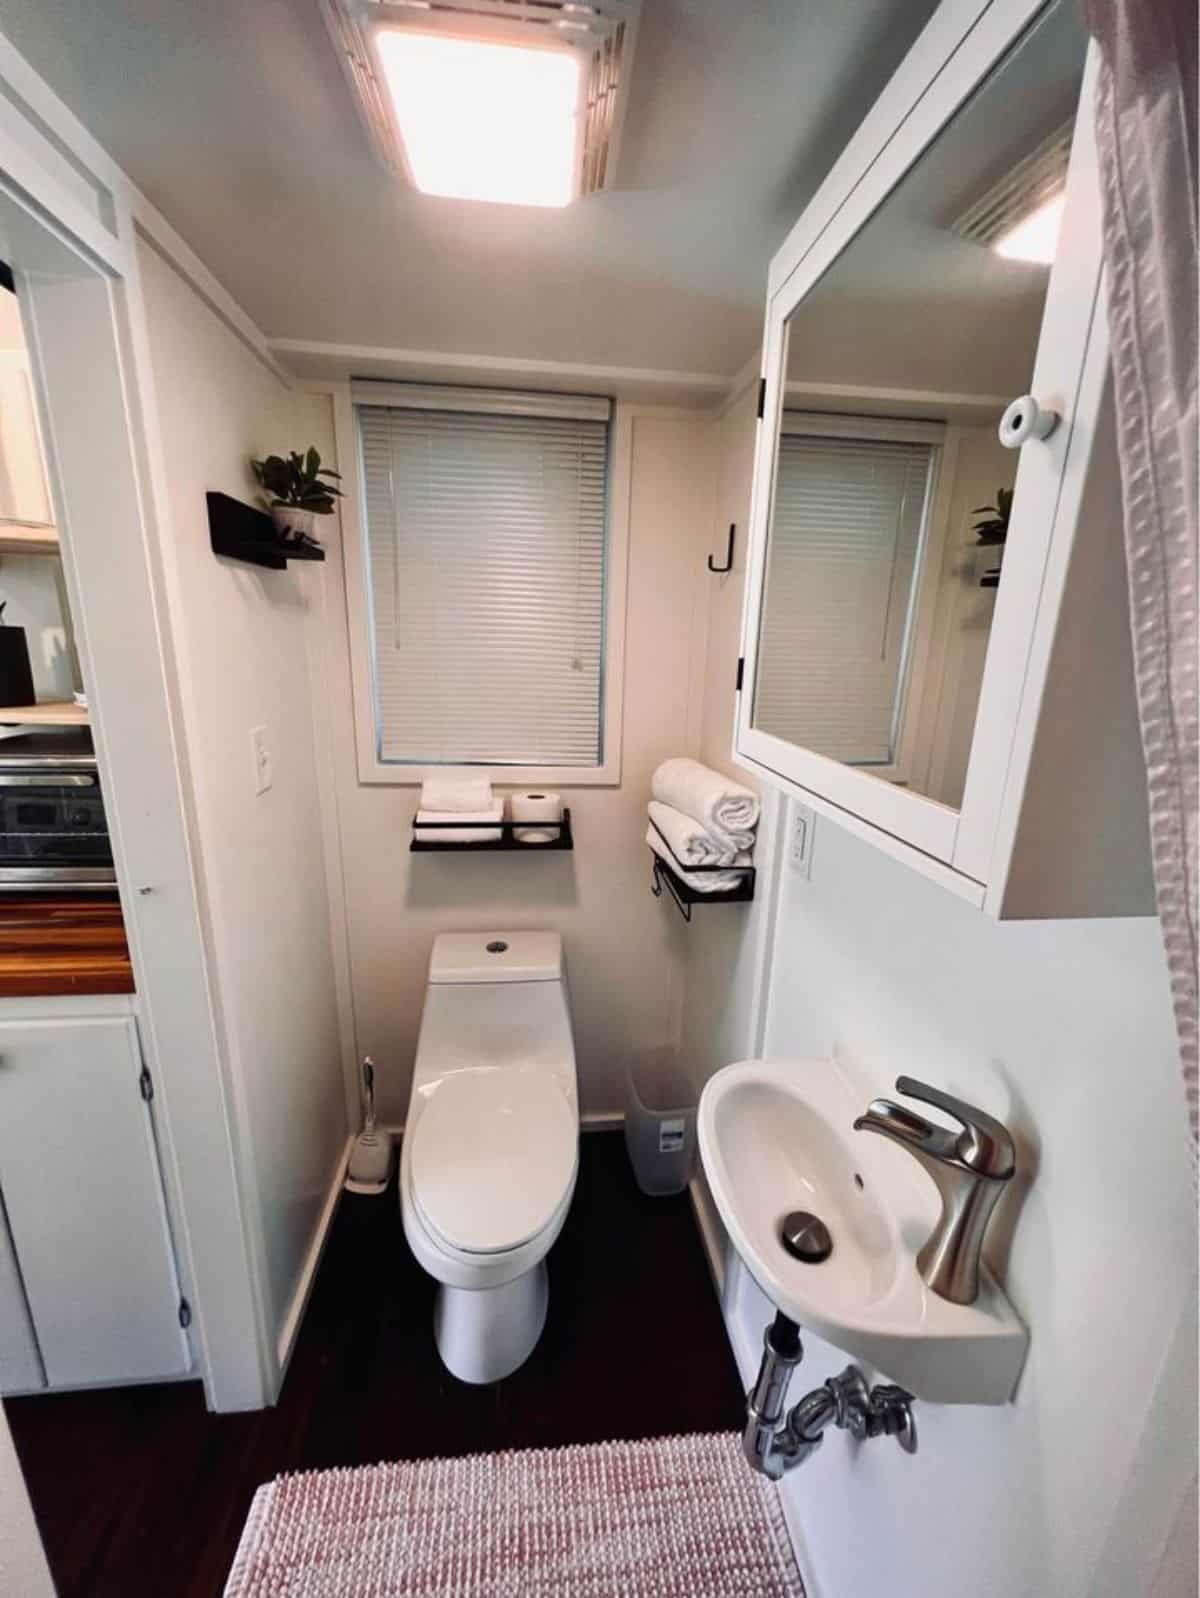 Bathroom of 20’ Furnished Tiny Home has a standard toilet, sink with mirror